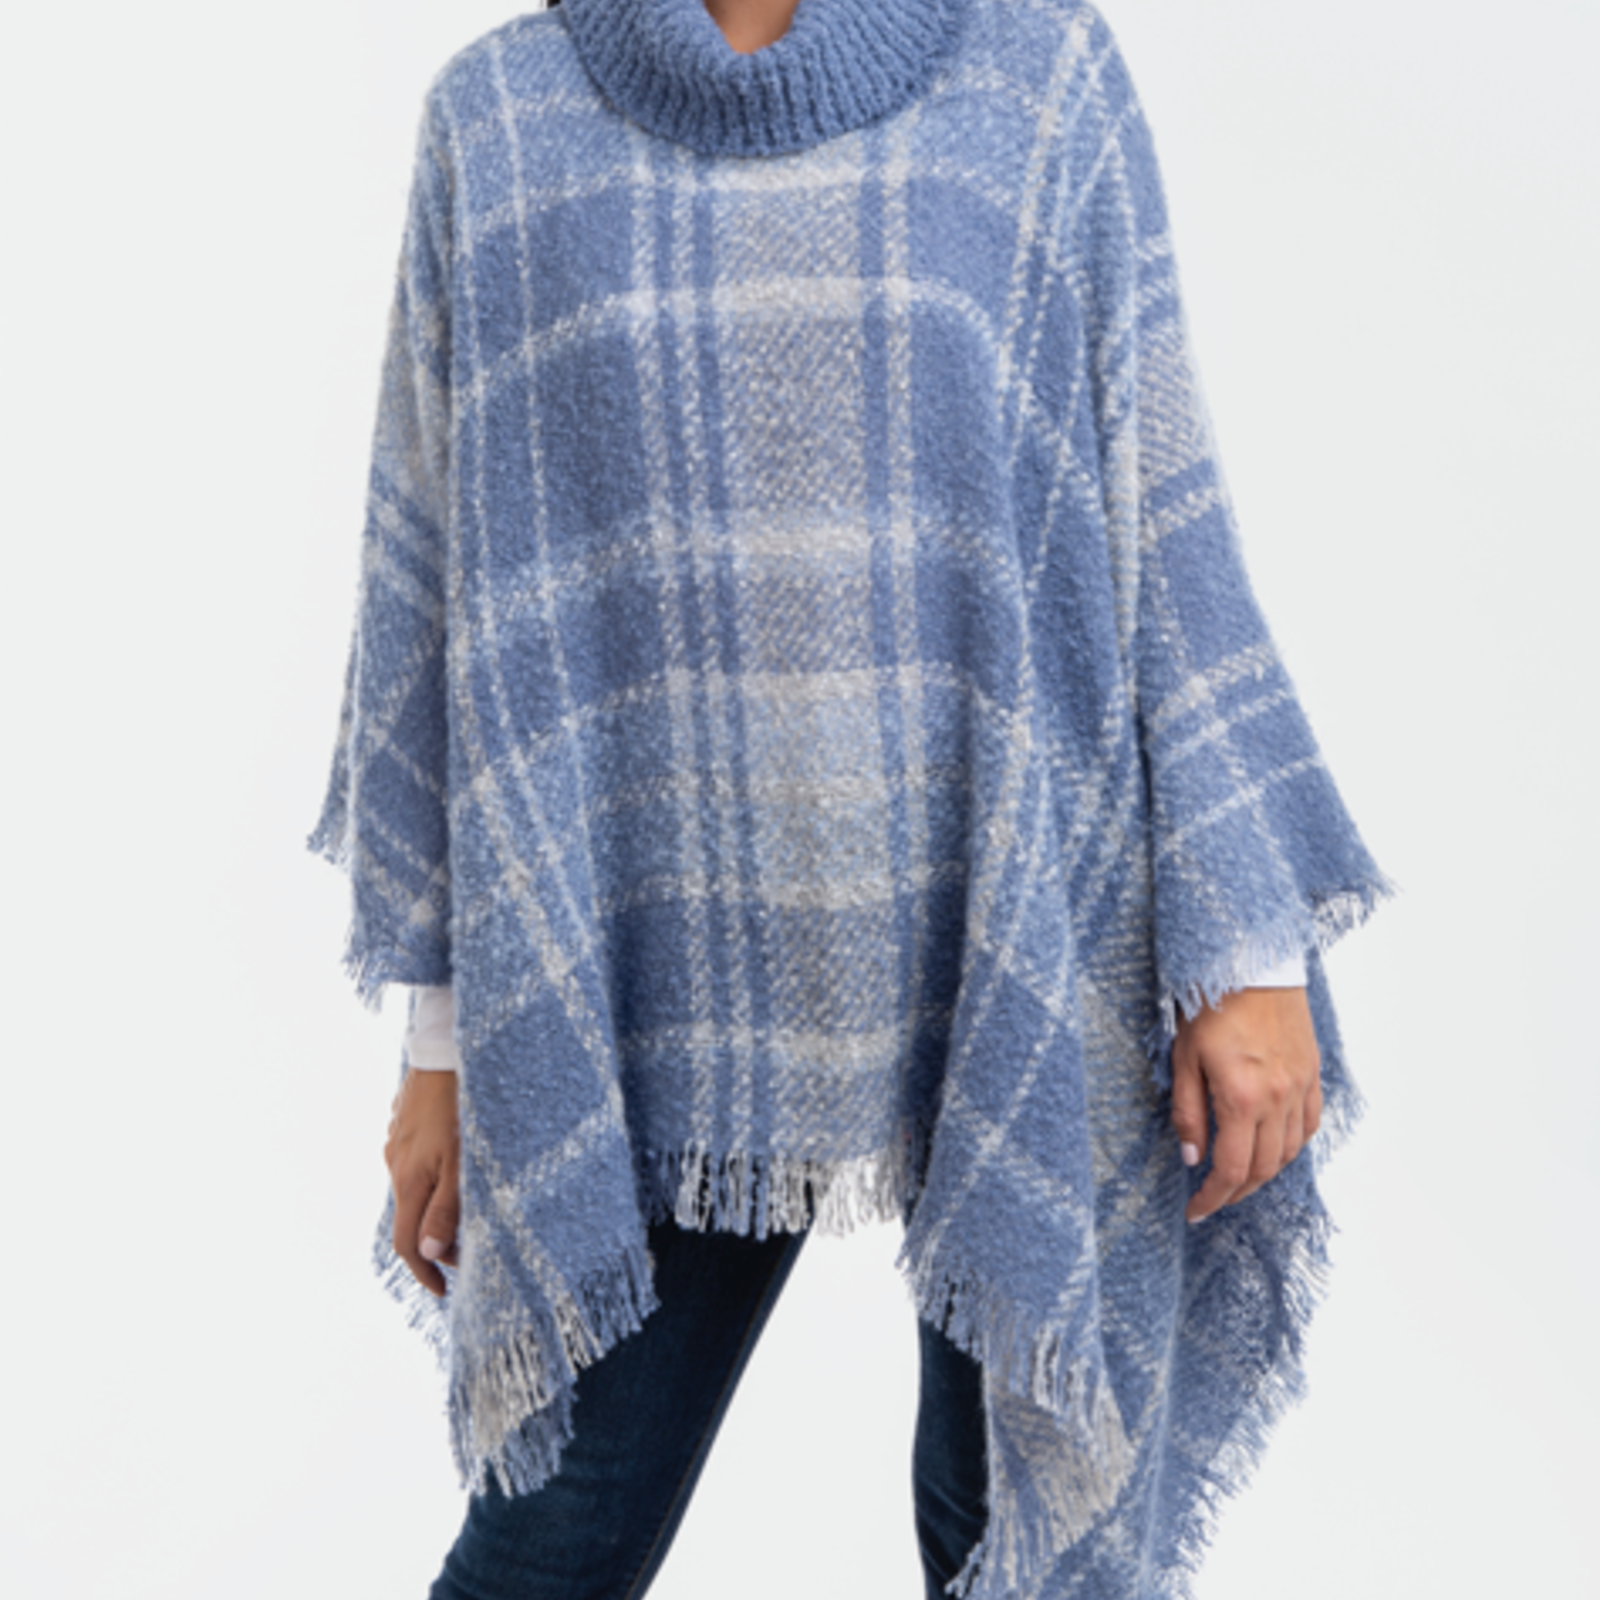 Simply Noelle Cozy Plaid Cowl Neck Poncho    PNCH9010 loading=